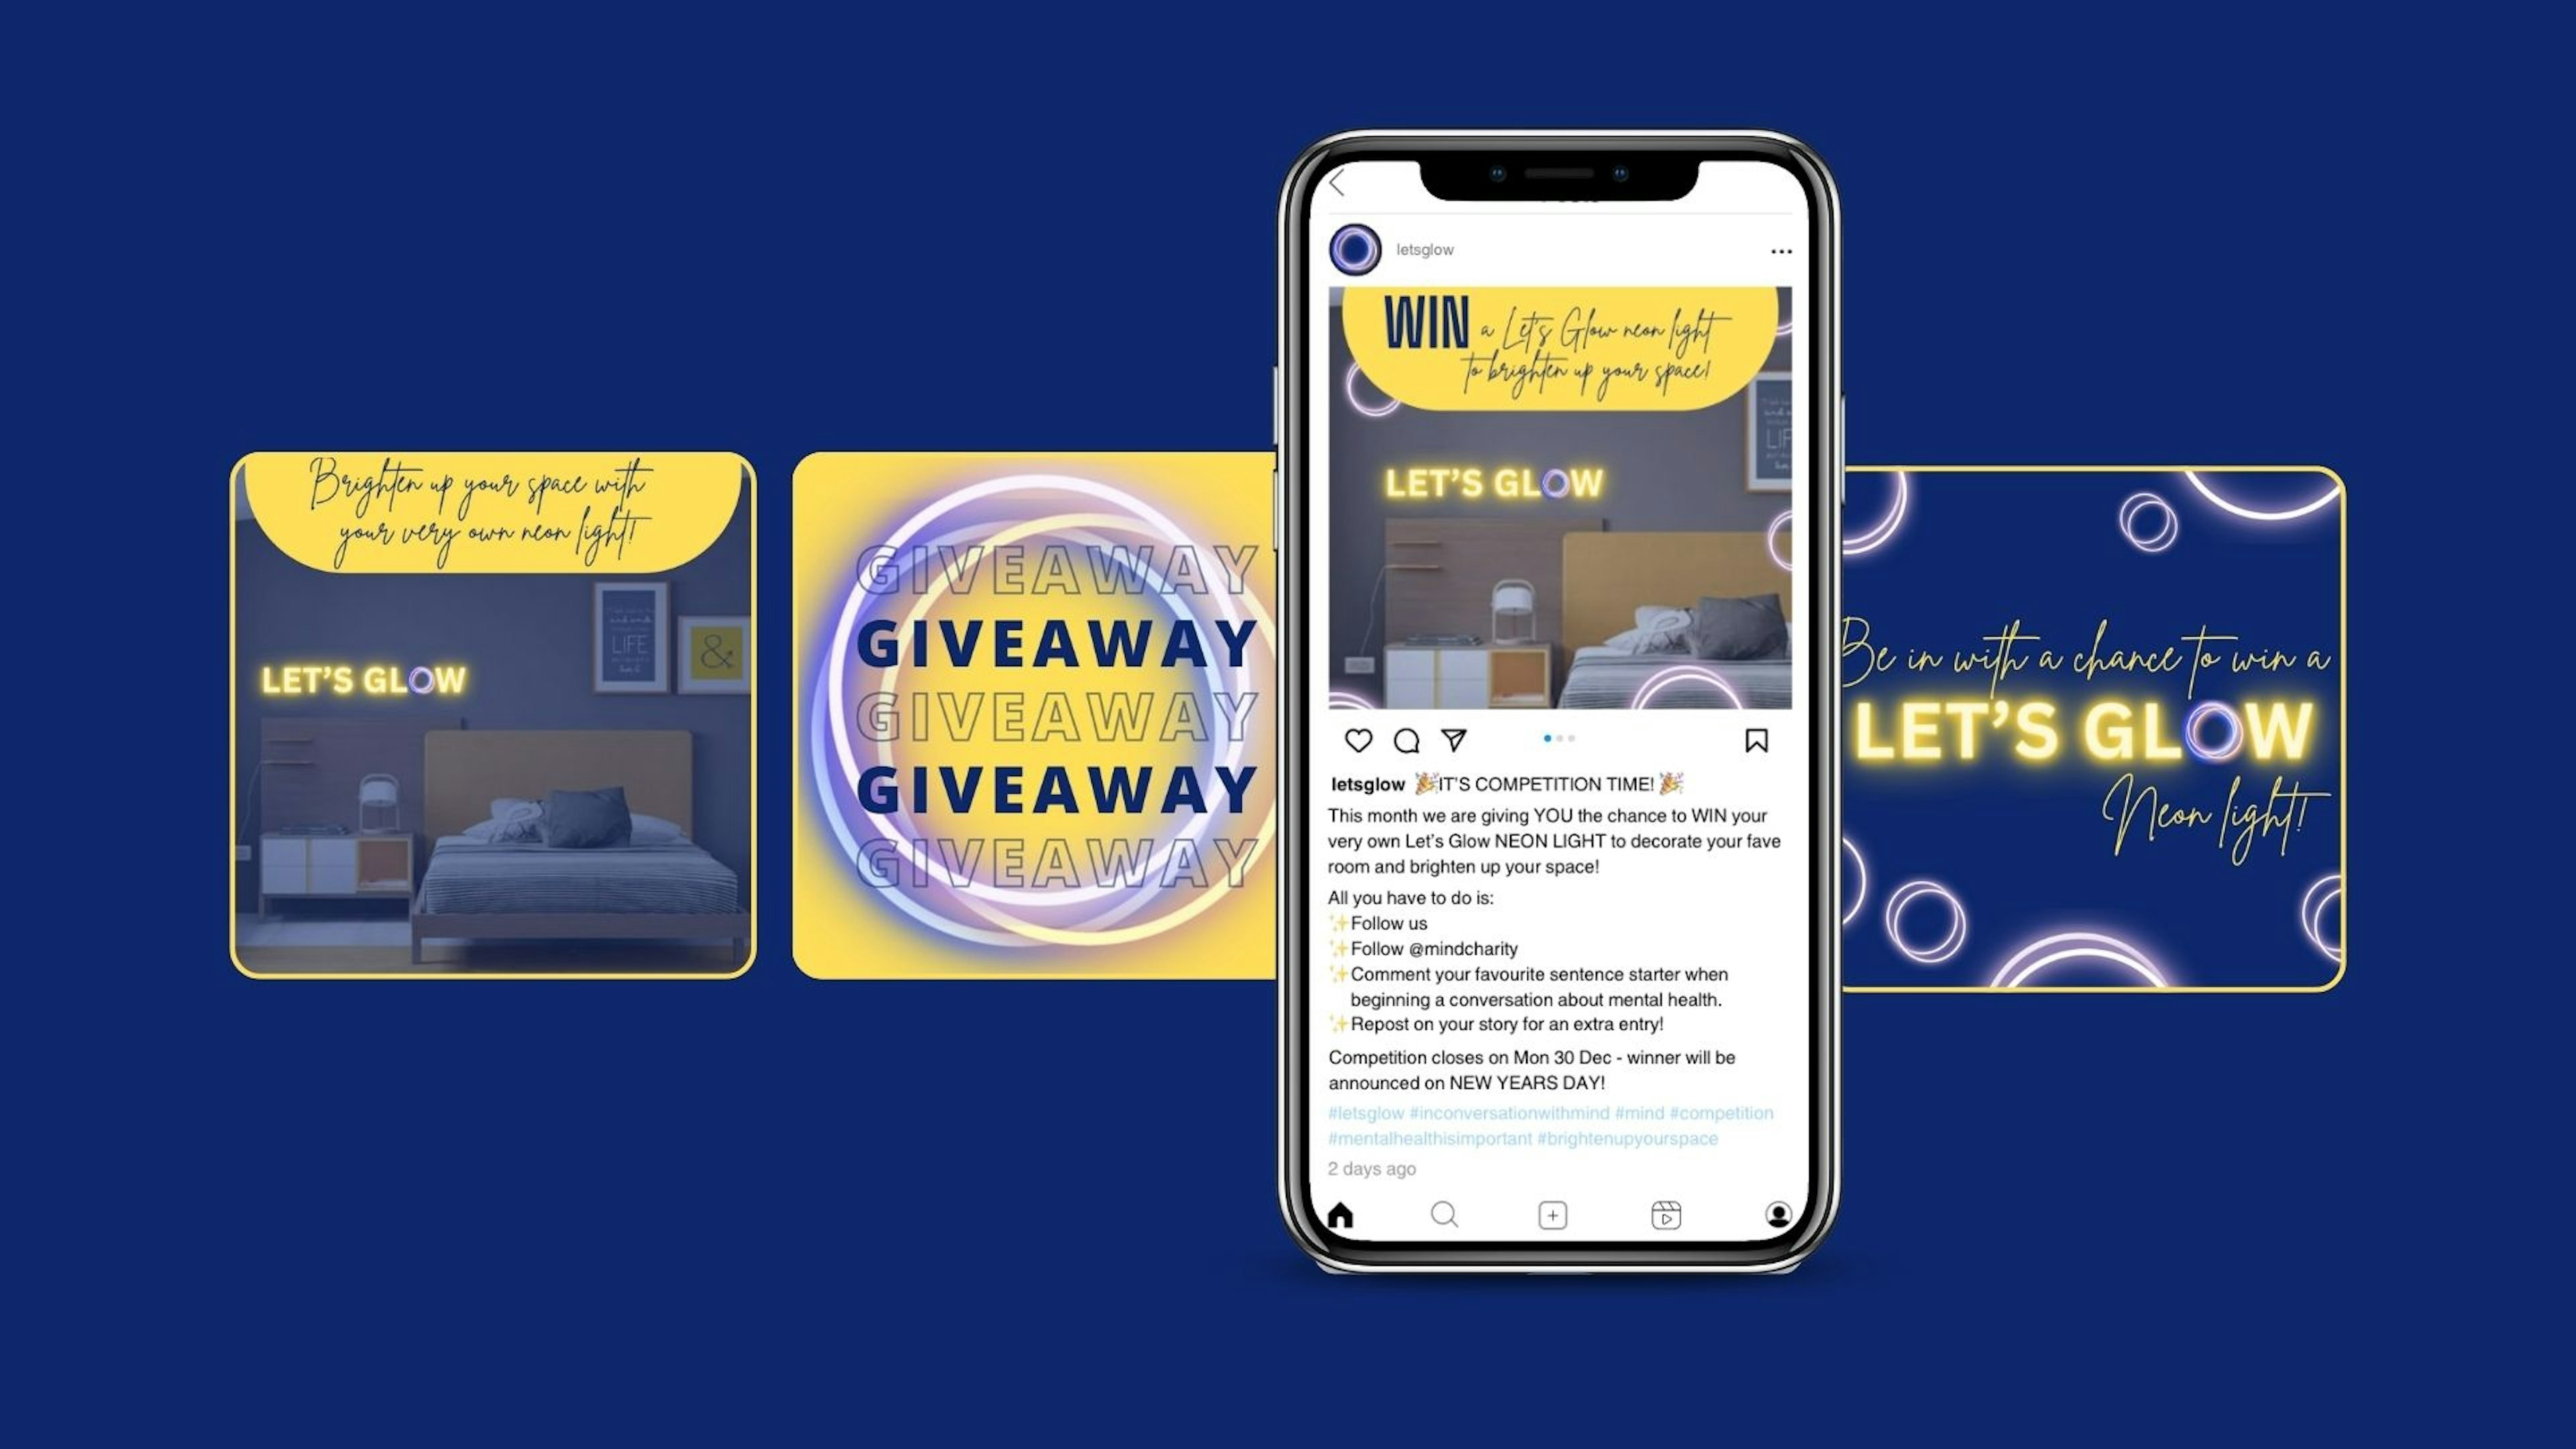 A giveaway engages Gen Z as it is a common thing seen on feeds via social media. Having an incentive encourages people to take a minute to apply for free and engage with Let’s Glow content. It also allows conversation in the comments where discussion is automatically happening.